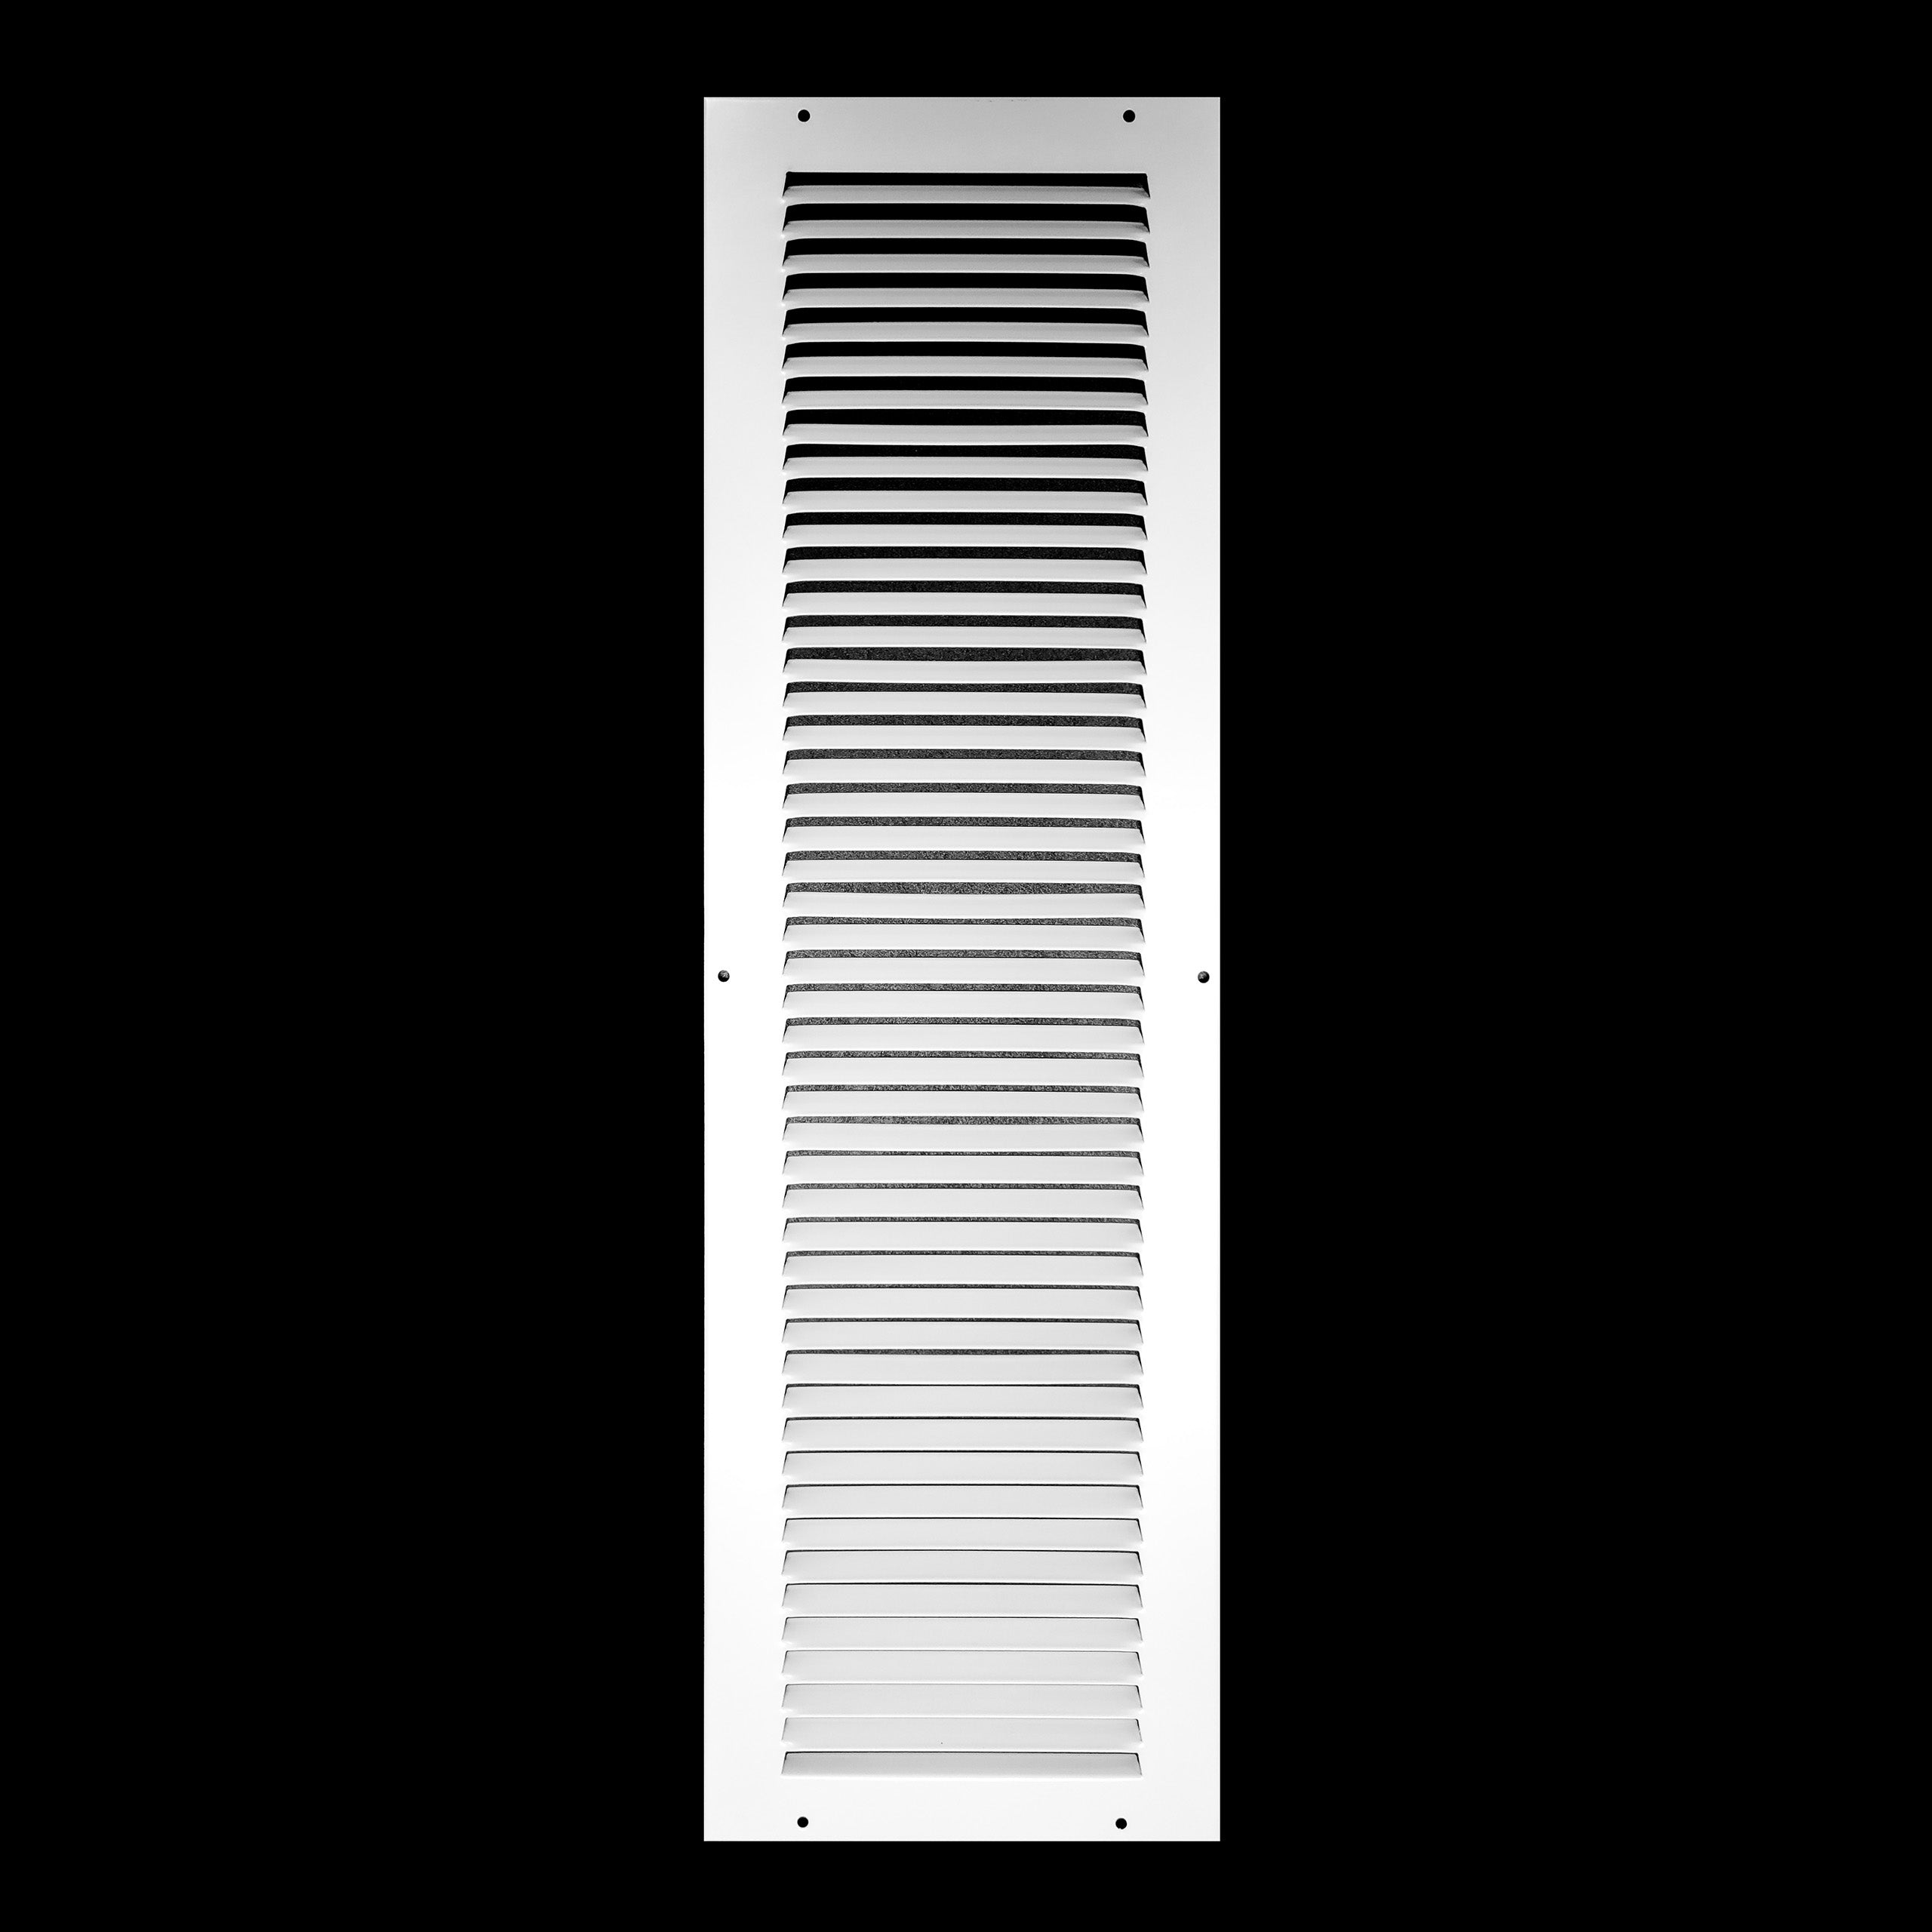 airgrilles 6" x 30" duct opening steel return air grille for sidewall and ceiling hnd-flt-1rag-wh-6x30 756014647945 1